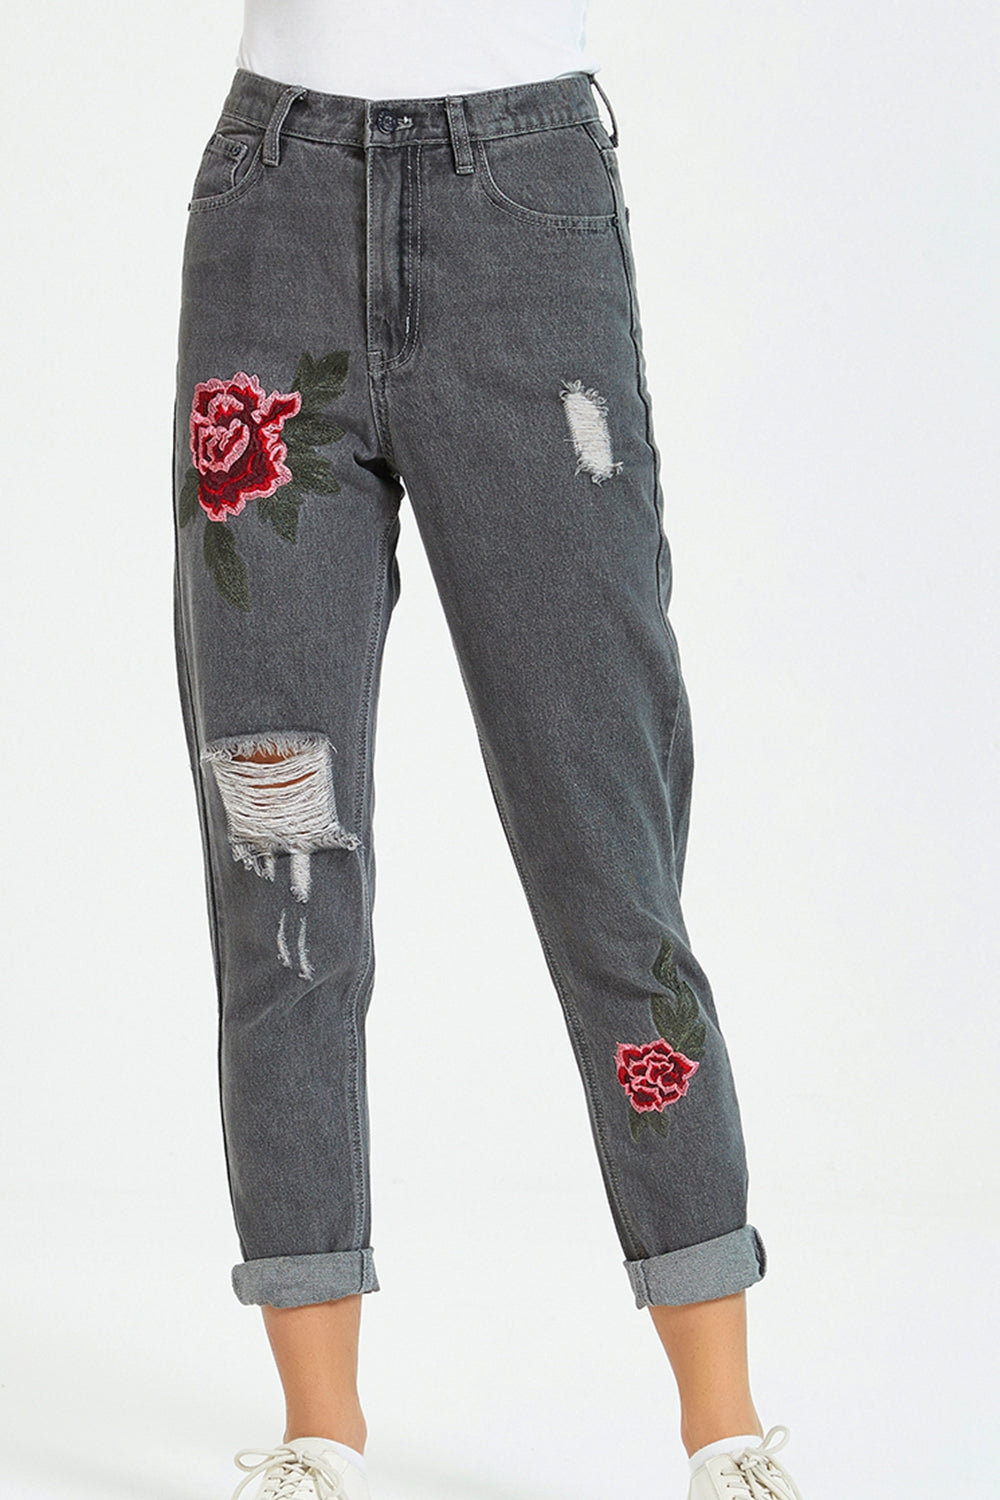 Flower Embroidery Distressed Jeans - Gray / 25 - Bottoms - Pants - 1 - 2024